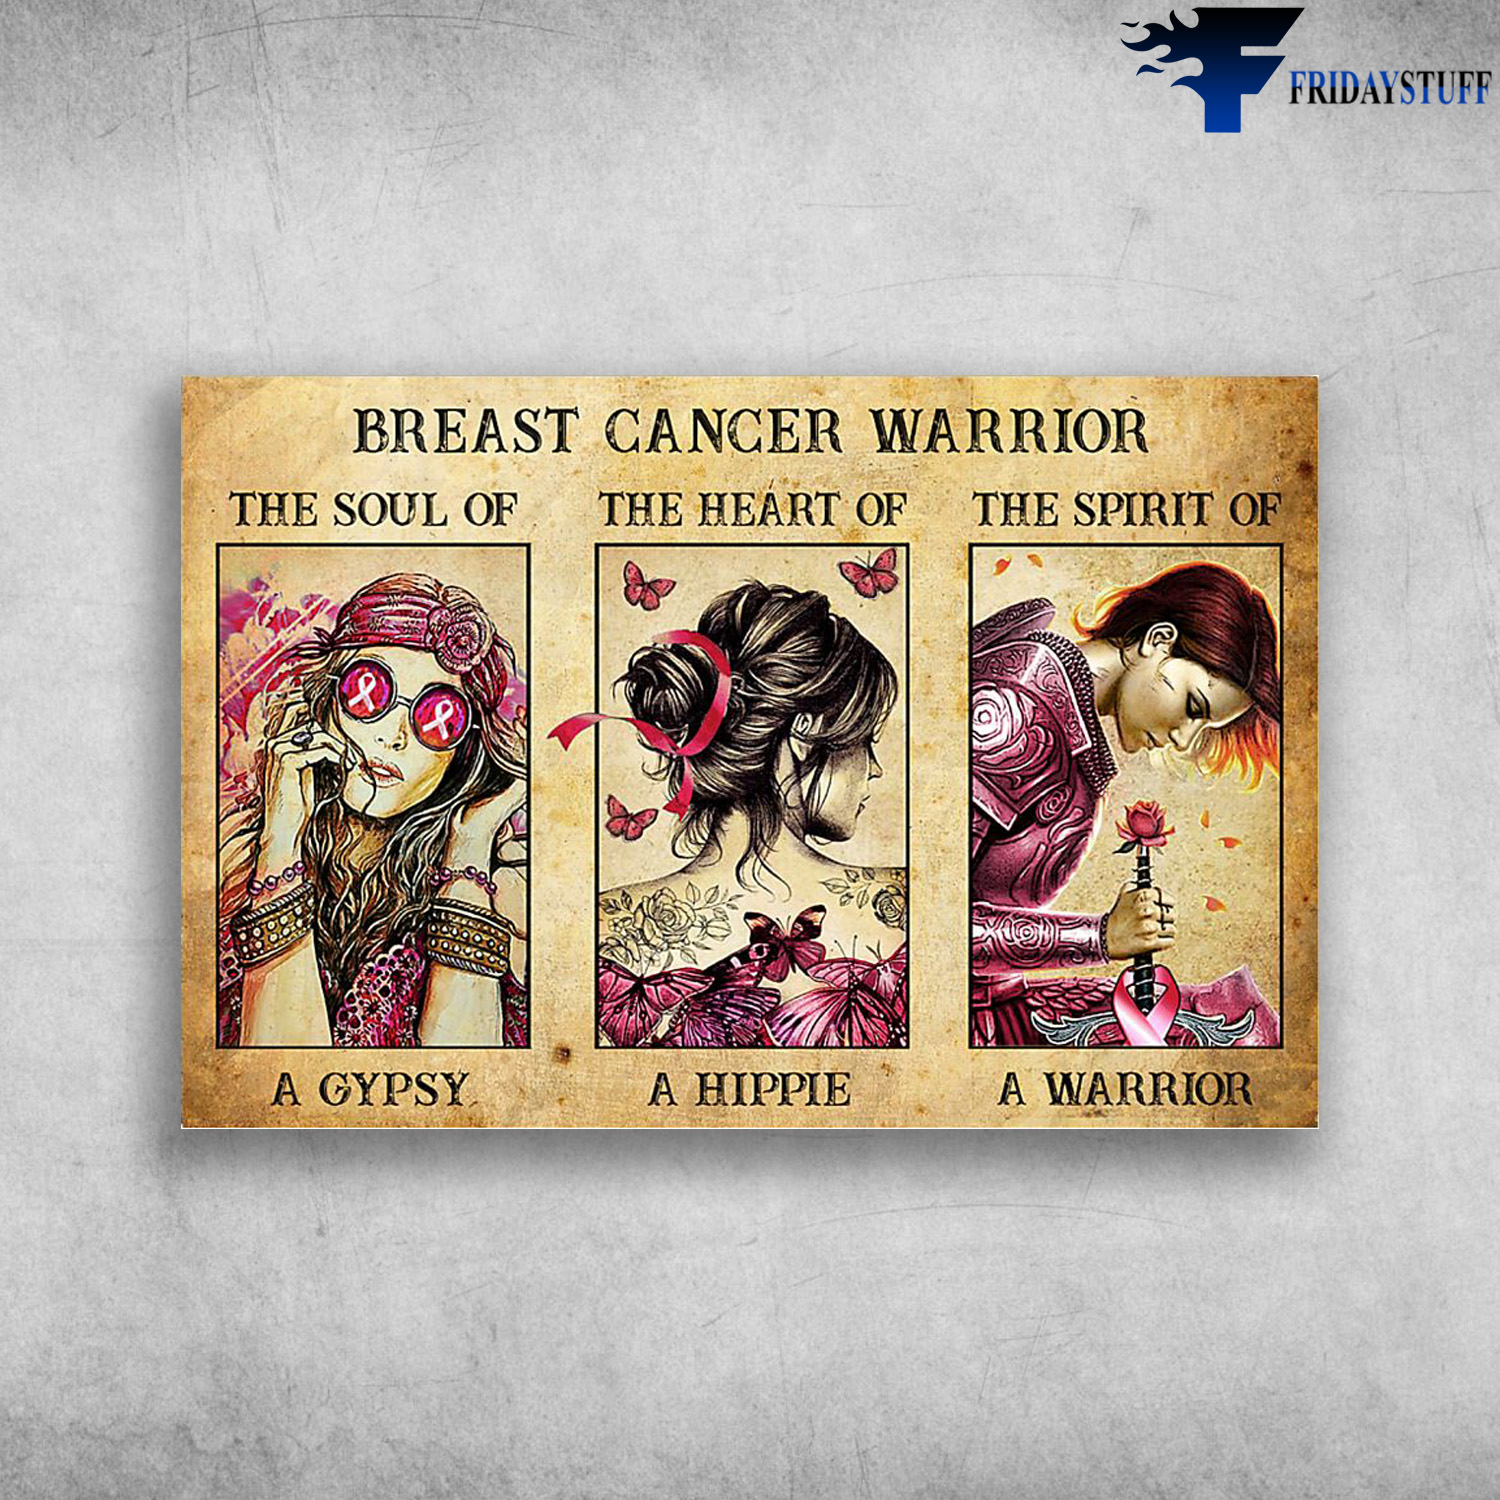 Breast Cancer Warrior - The Soul Of A Gypsy, The Heart Of A Hippie, The Spirit Of A Warrior